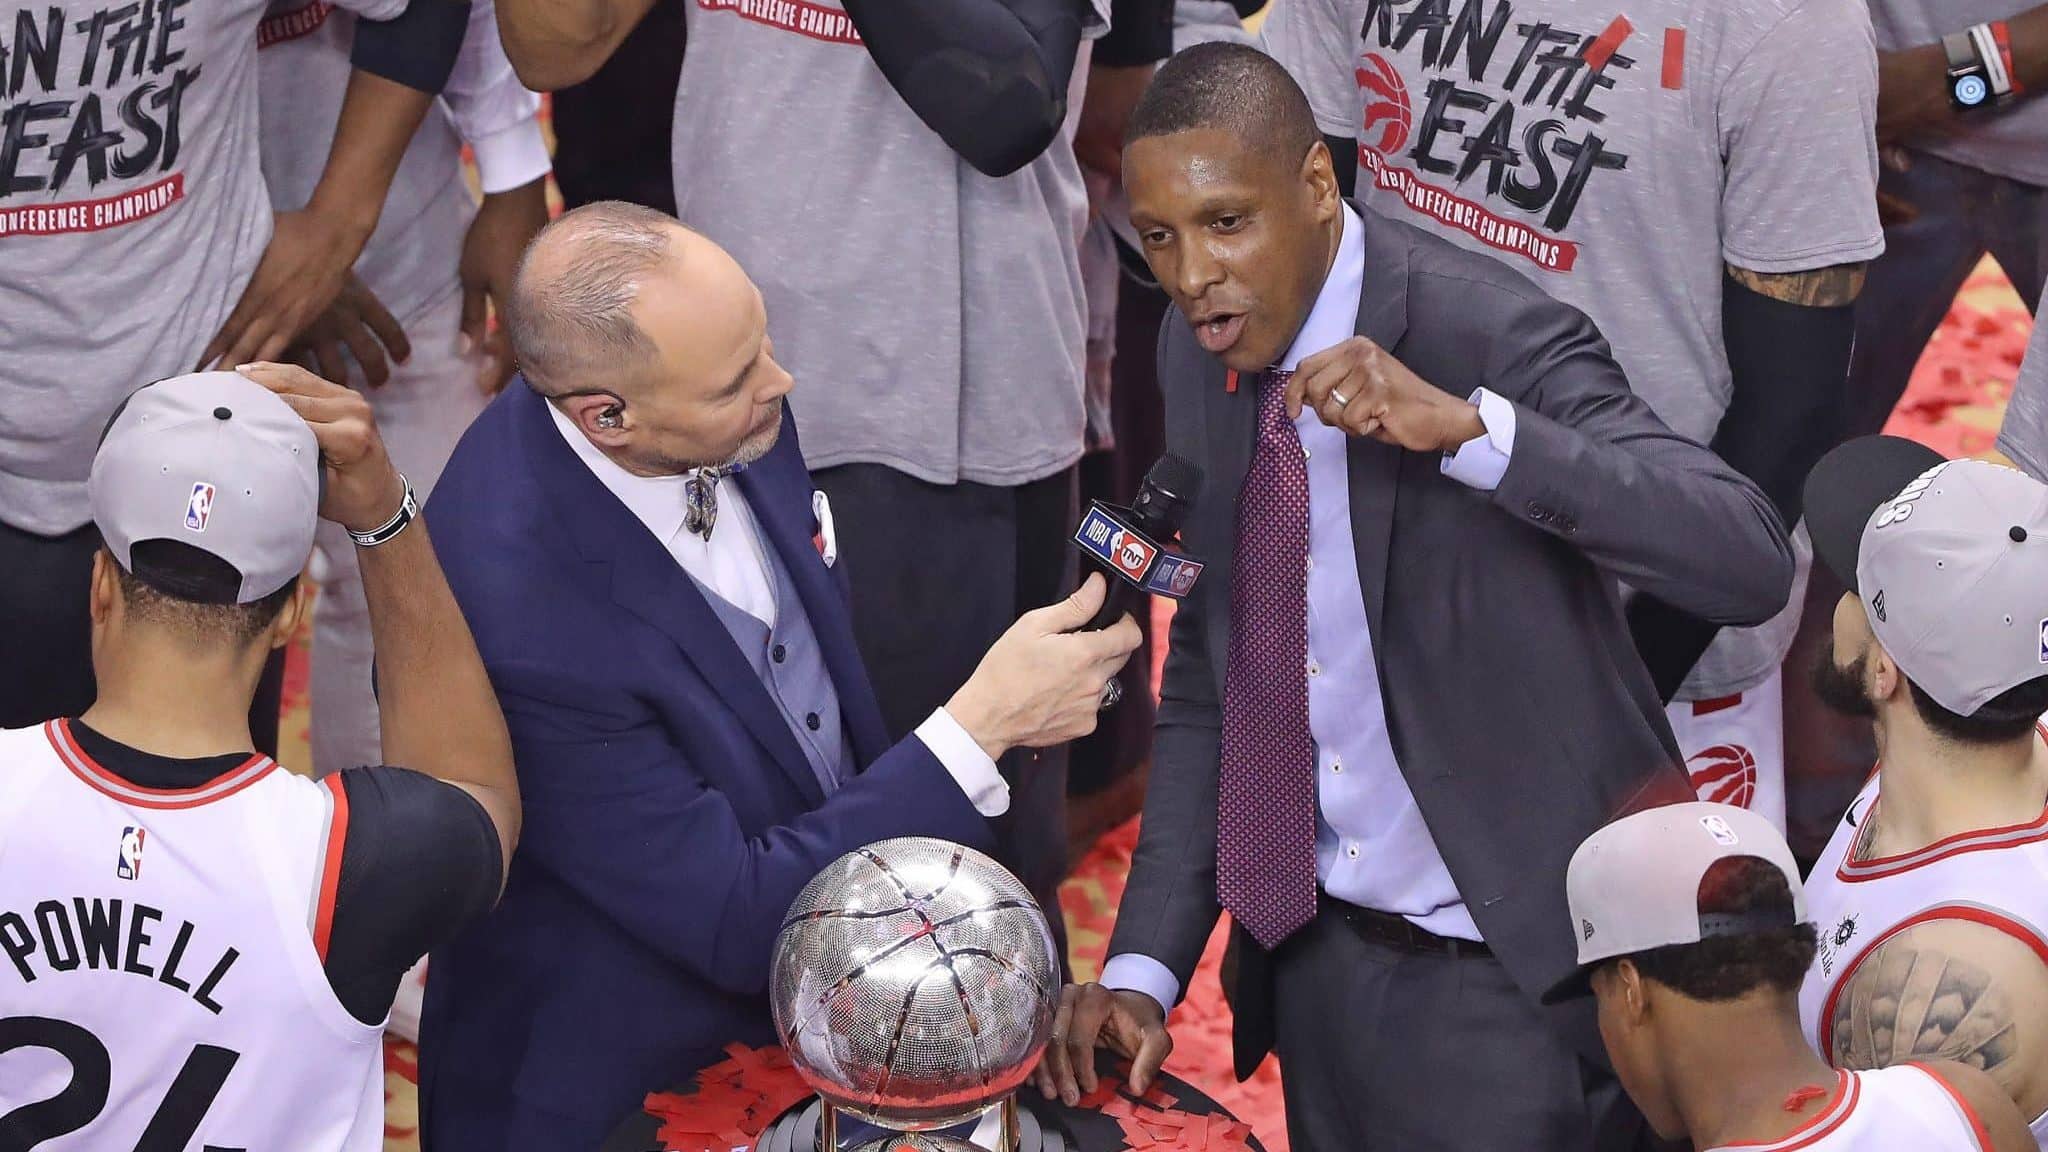 TORONTO, ON - MAY 25: Toronto Raptors General Manager Masai Ujiri addresses the crowd after defeating the Milwaukee Bucks in Game Six of the NBA Eastern Conference Final at Scotiabank Arena on May 25, 2019 in Toronto, Ontario, Canada. NOTE TO USER: user expressly acknowledges and agrees by downloading and/or using this Photograph, user is consenting to the terms and conditions of the Getty Images Licence Agreement.